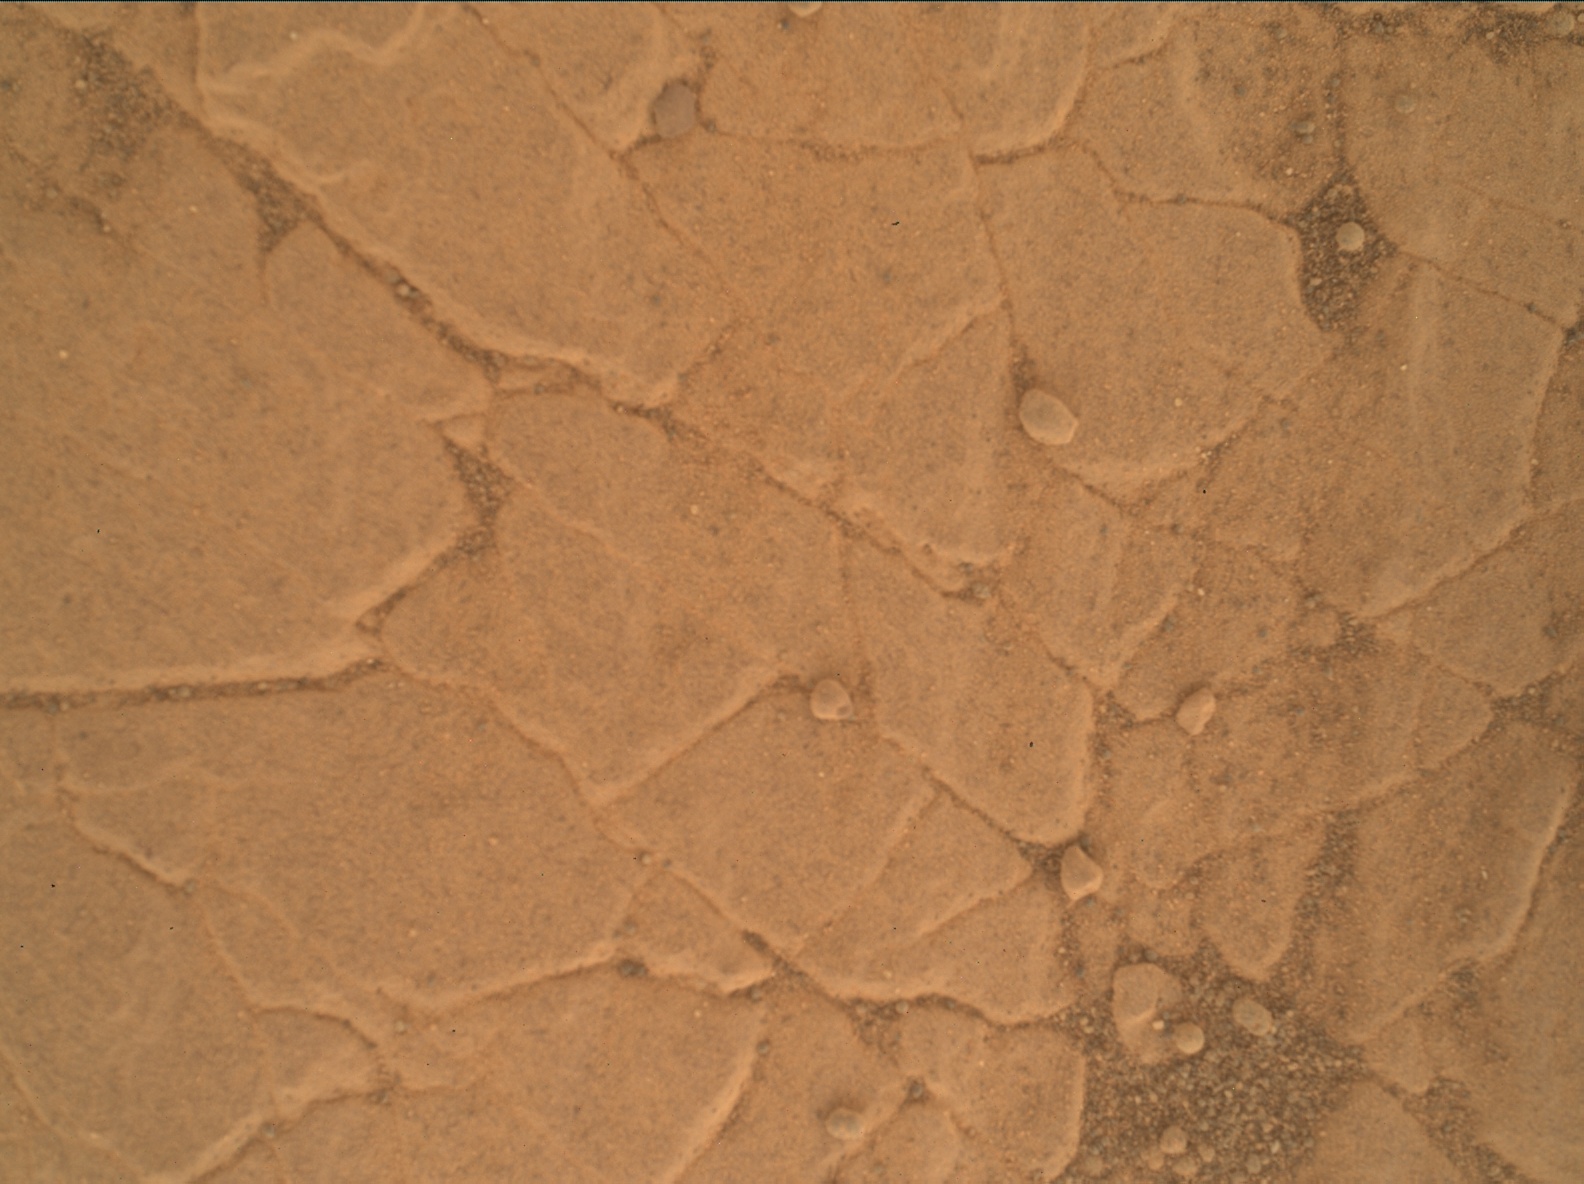 Nasa's Mars rover Curiosity acquired this image using its Mars Hand Lens Imager (MAHLI) on Sol 2359